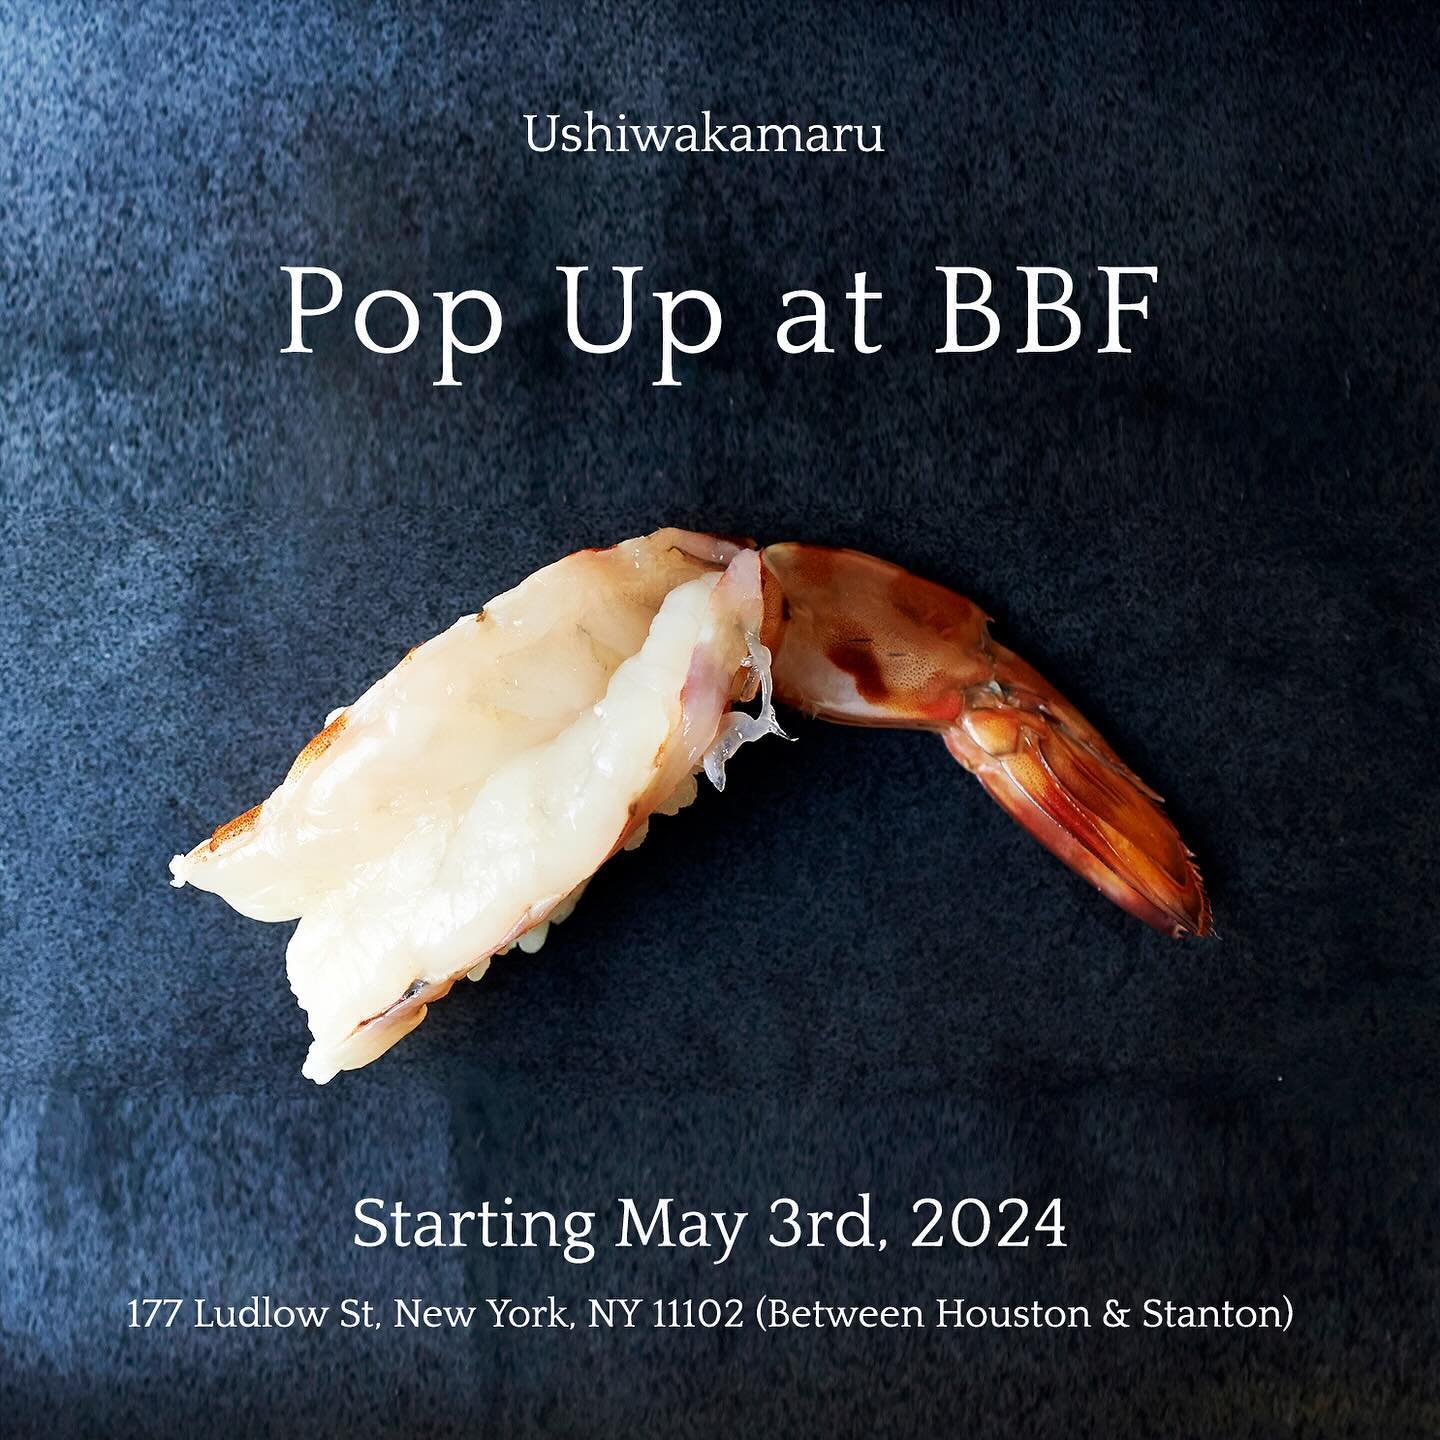 Ushiwakamaru is coming to BBF(@bbf.nyc) as a Pop-Up starting May 3rd!
Join us for a night of Edomae sushi by Chef Hideo.

The Signature 10-piece Omakase is $135 per person; a la carte ordering is also available. BBF offers Cocktails and curated sake 